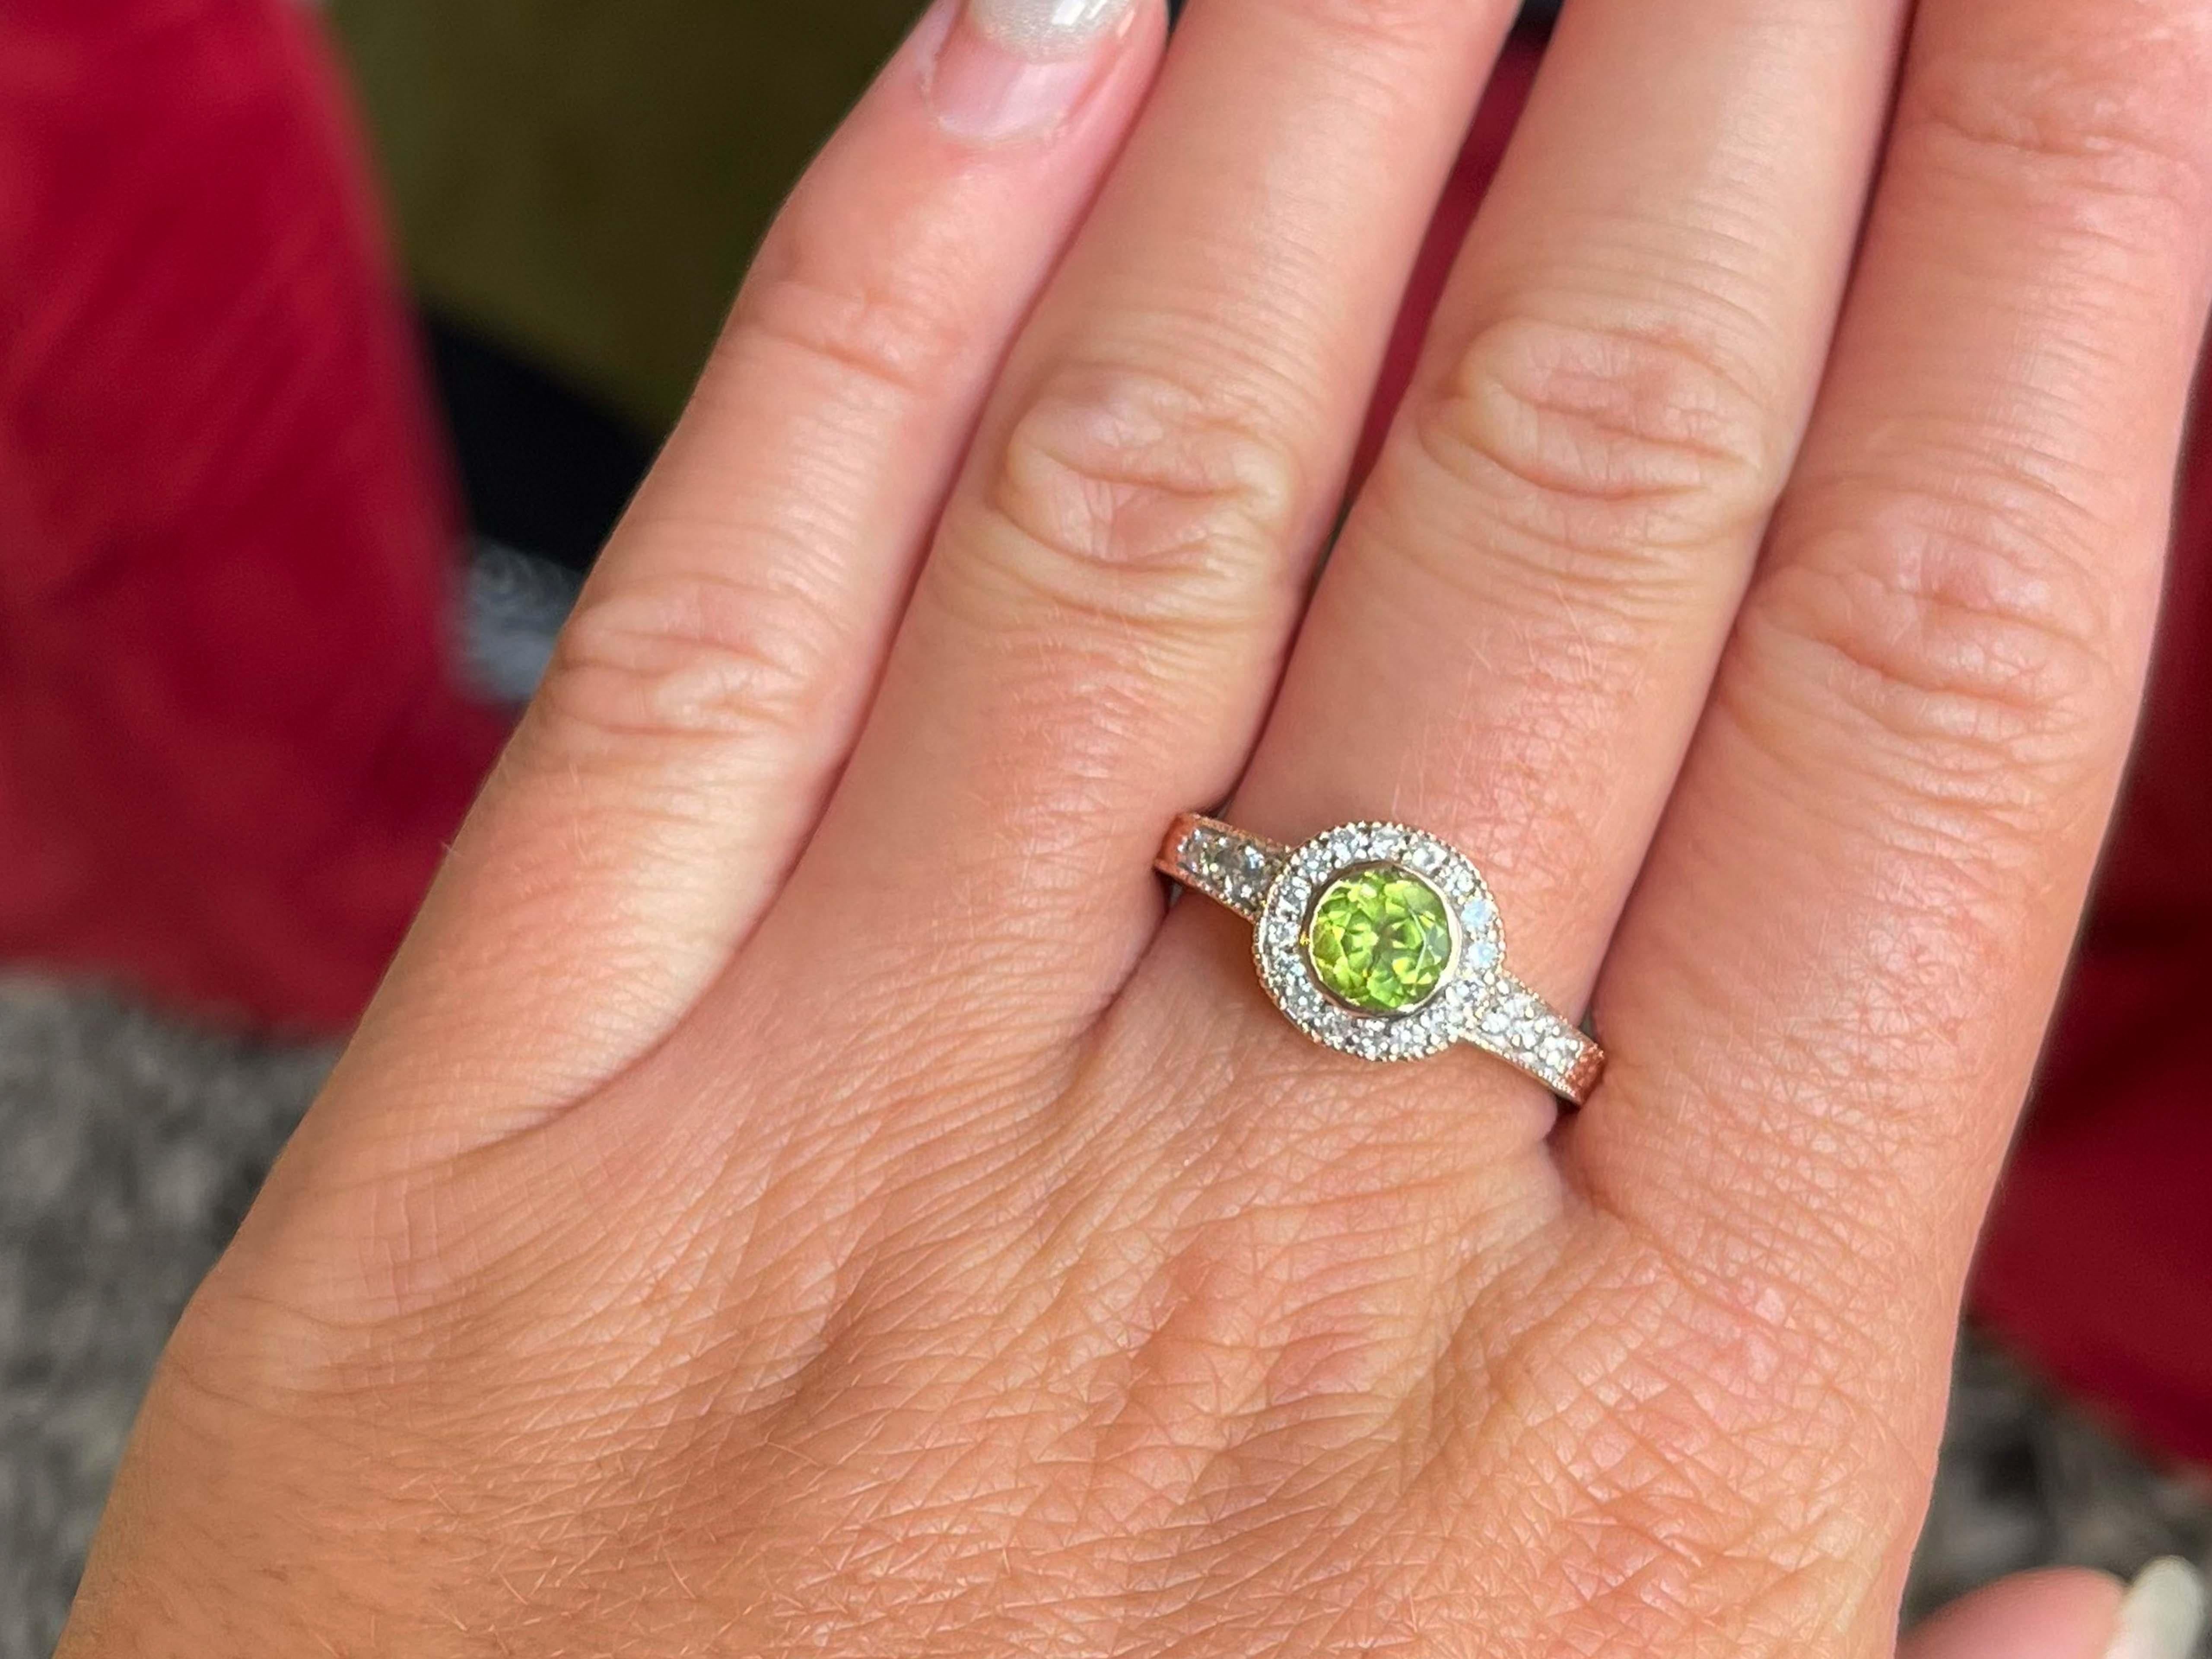 Item Specifications:

Metal: 14K Pink Gold

Ring Size: 9

Style: Statement Ring

Total Weight: 5.1 Grams

Gemstone Specifications:

Gemstones: 1 green peridot

Peridot Measurements: 6.7 x 6.9 

Diamond Count: 22

Diamond Color: G-H

Diamond Clarity: